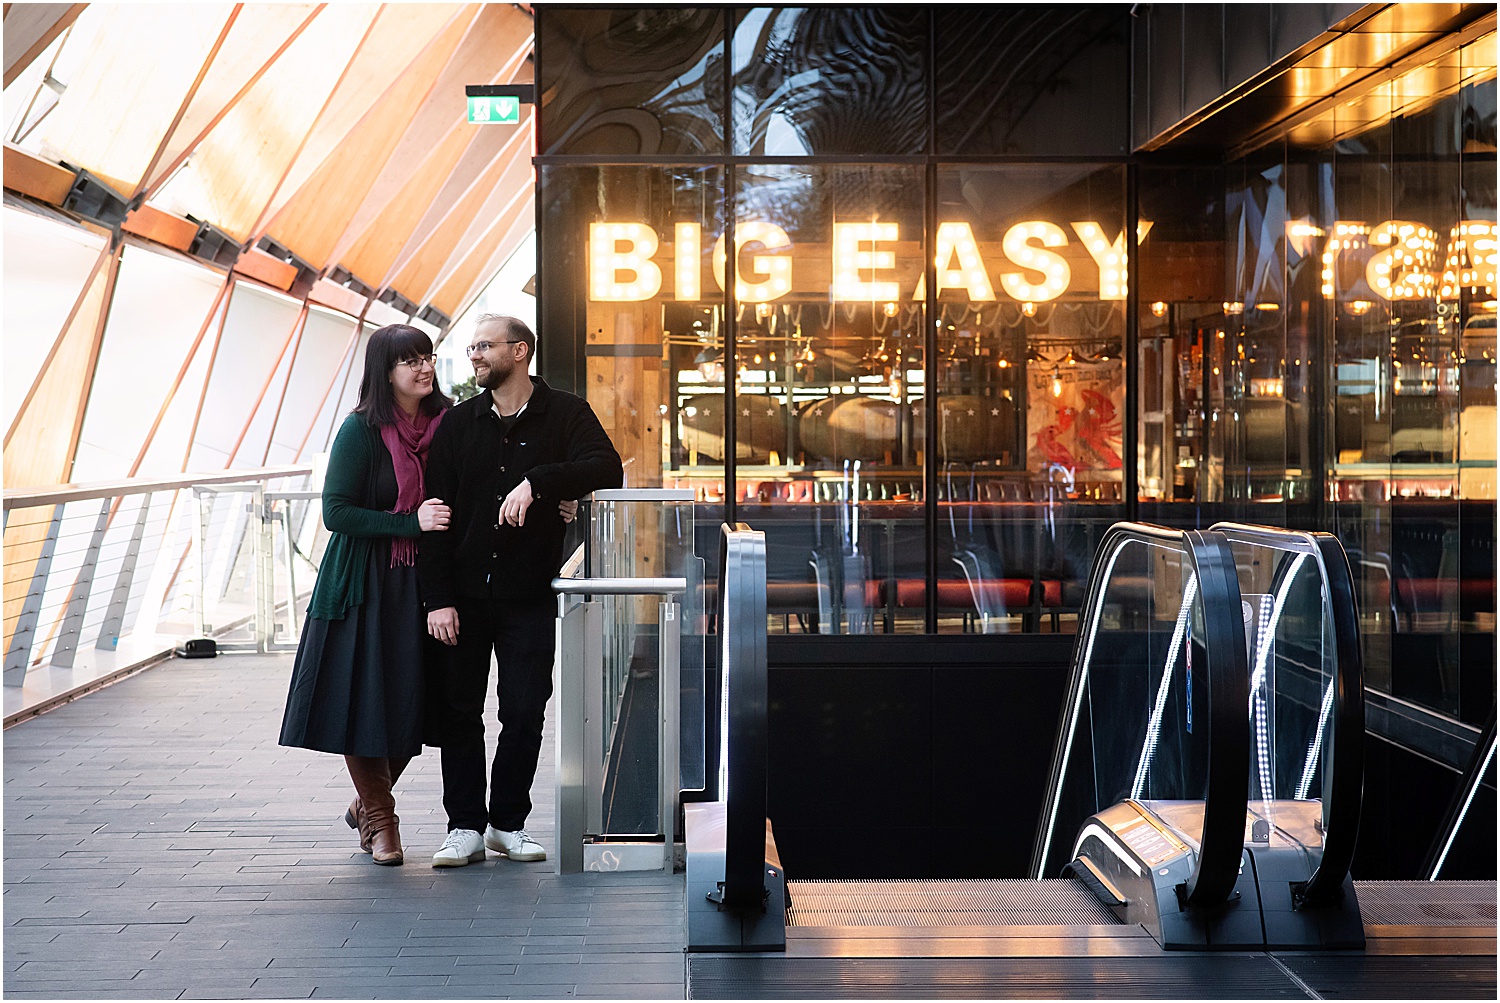 crossrail-place-engagement-session-canary-wharf-london-carl-naomi-lily-sawyer-photo